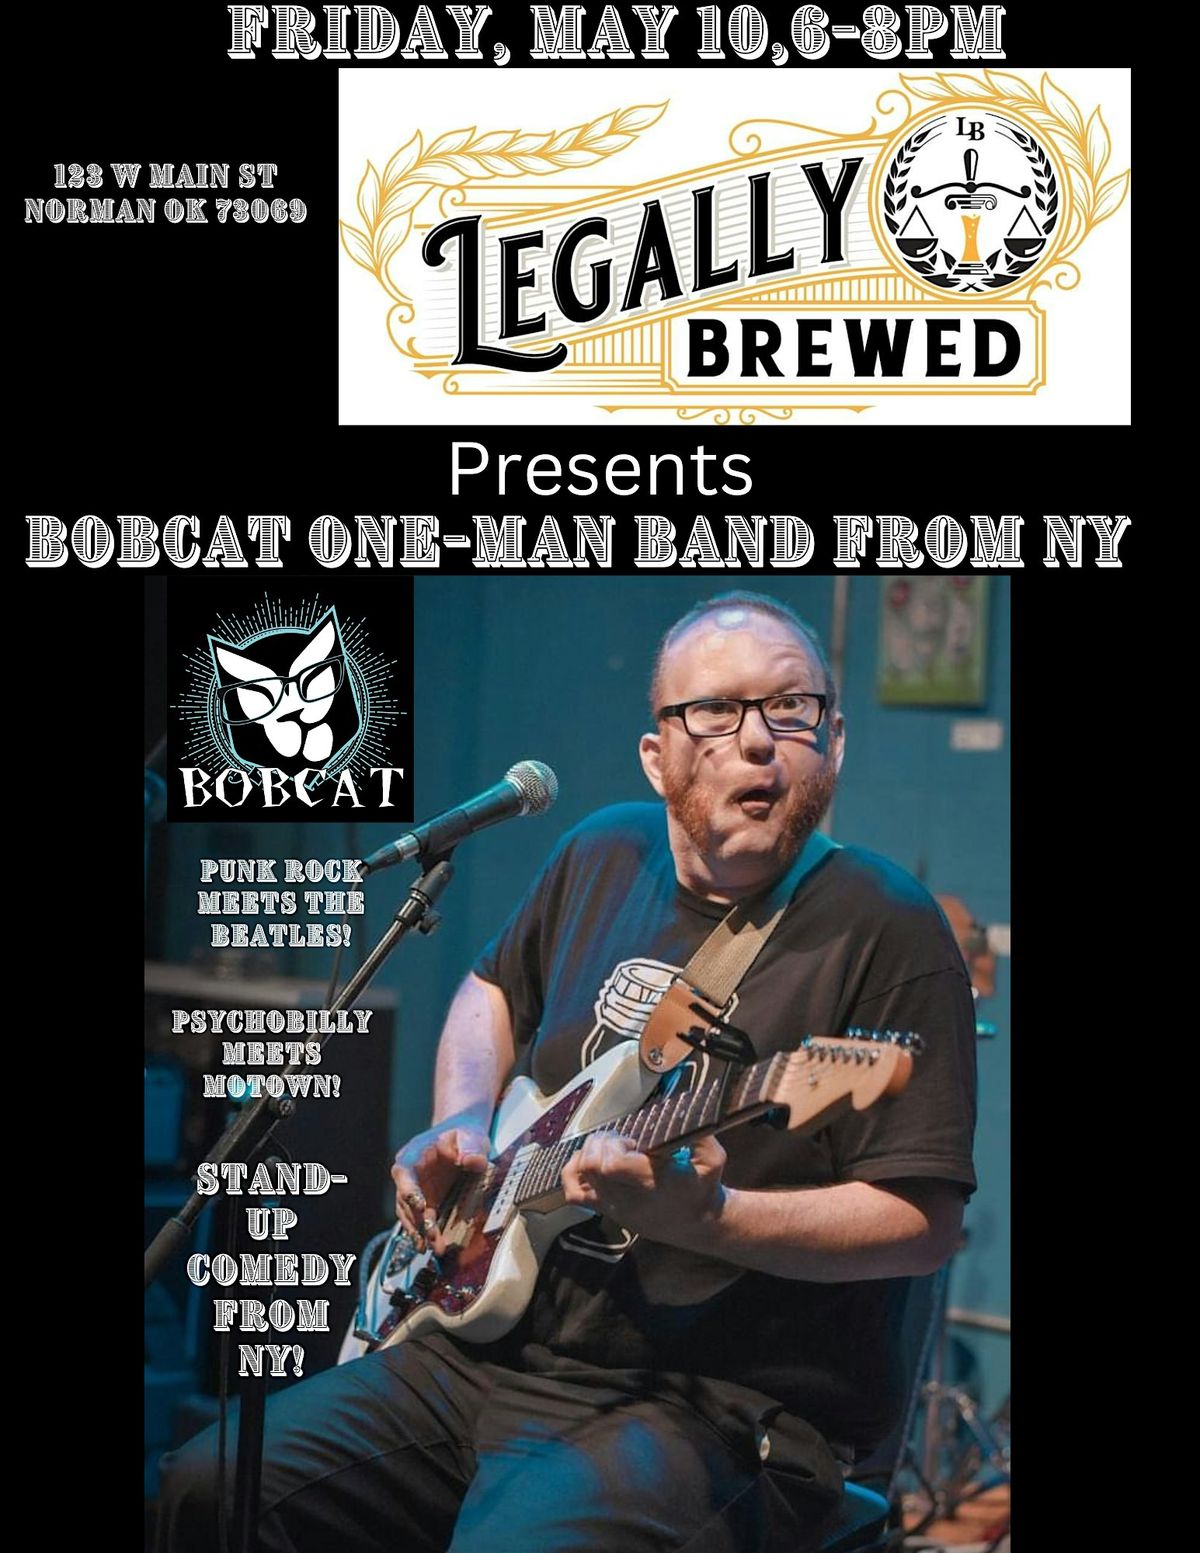 Bobcat Live At Legally Brewed, Norman OK